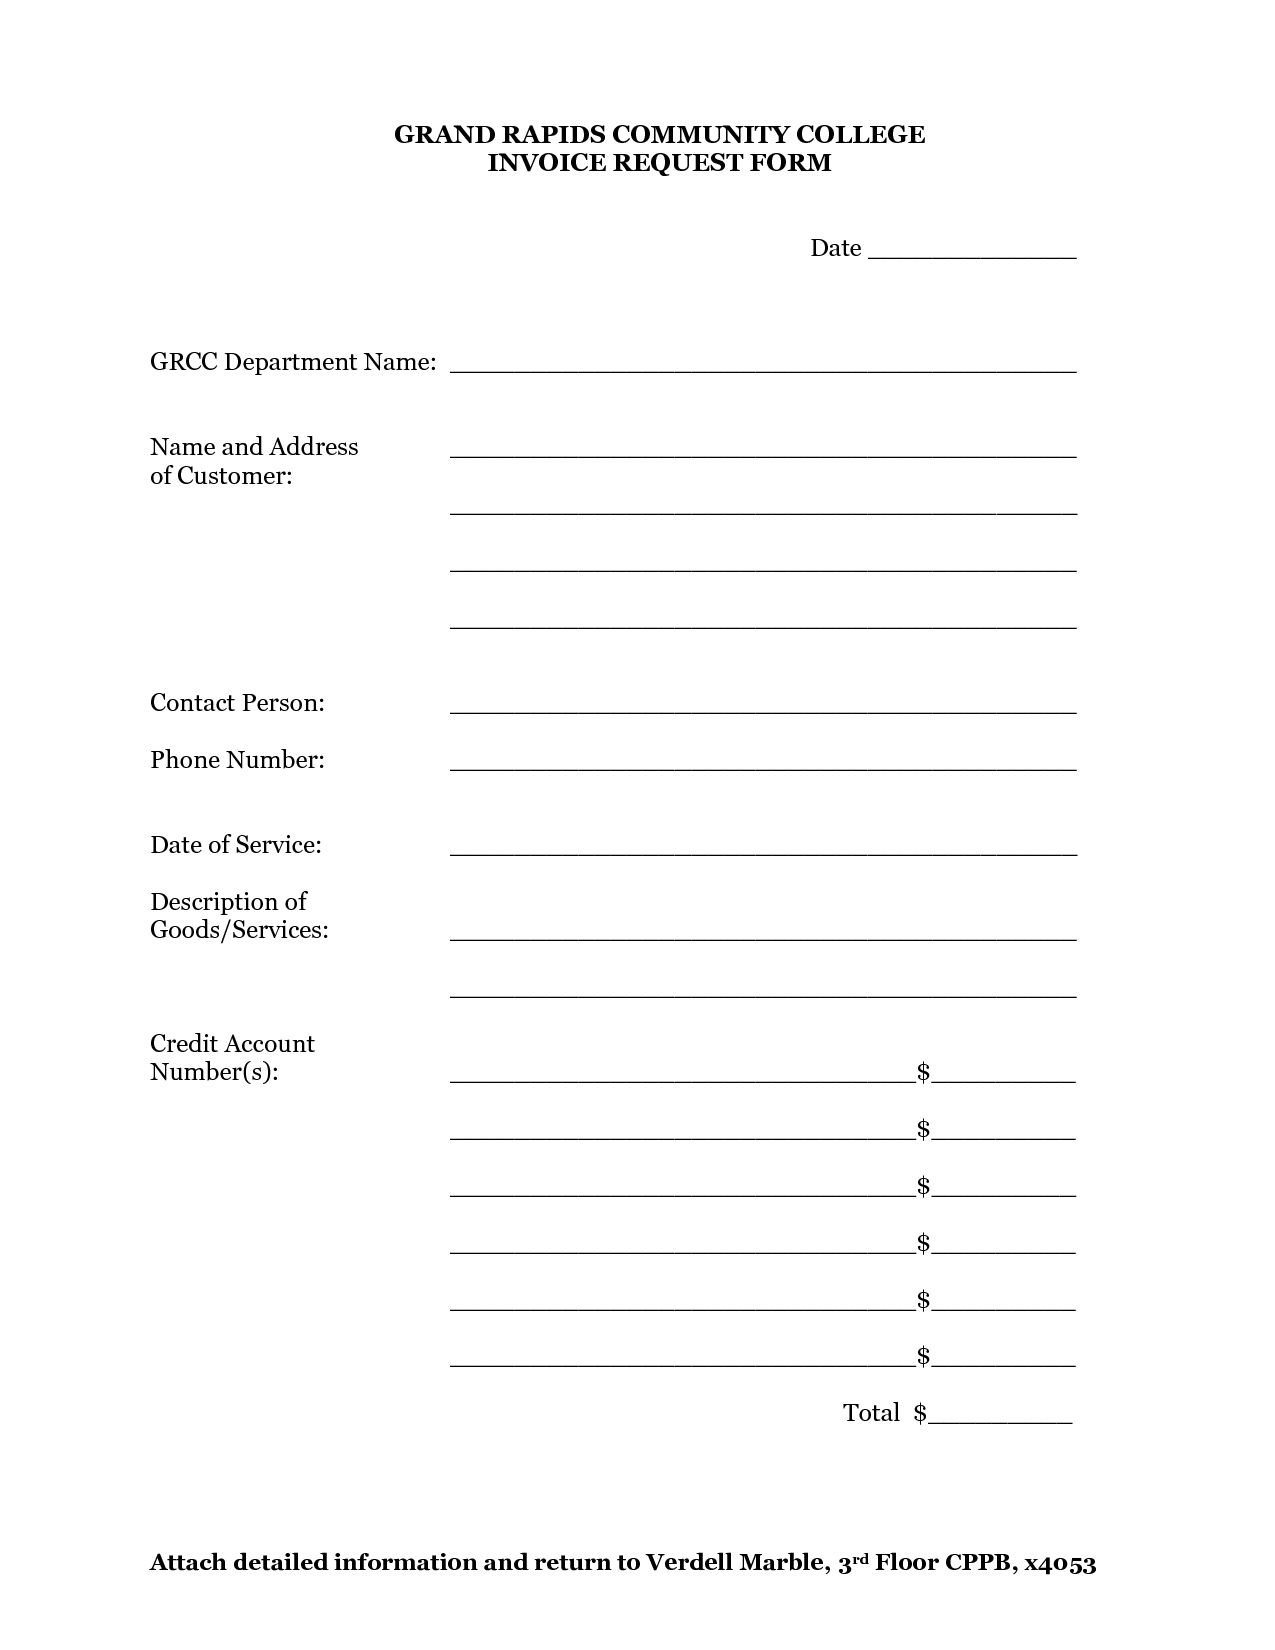 standard invoice form standard invoice form template blank copy of invoice template